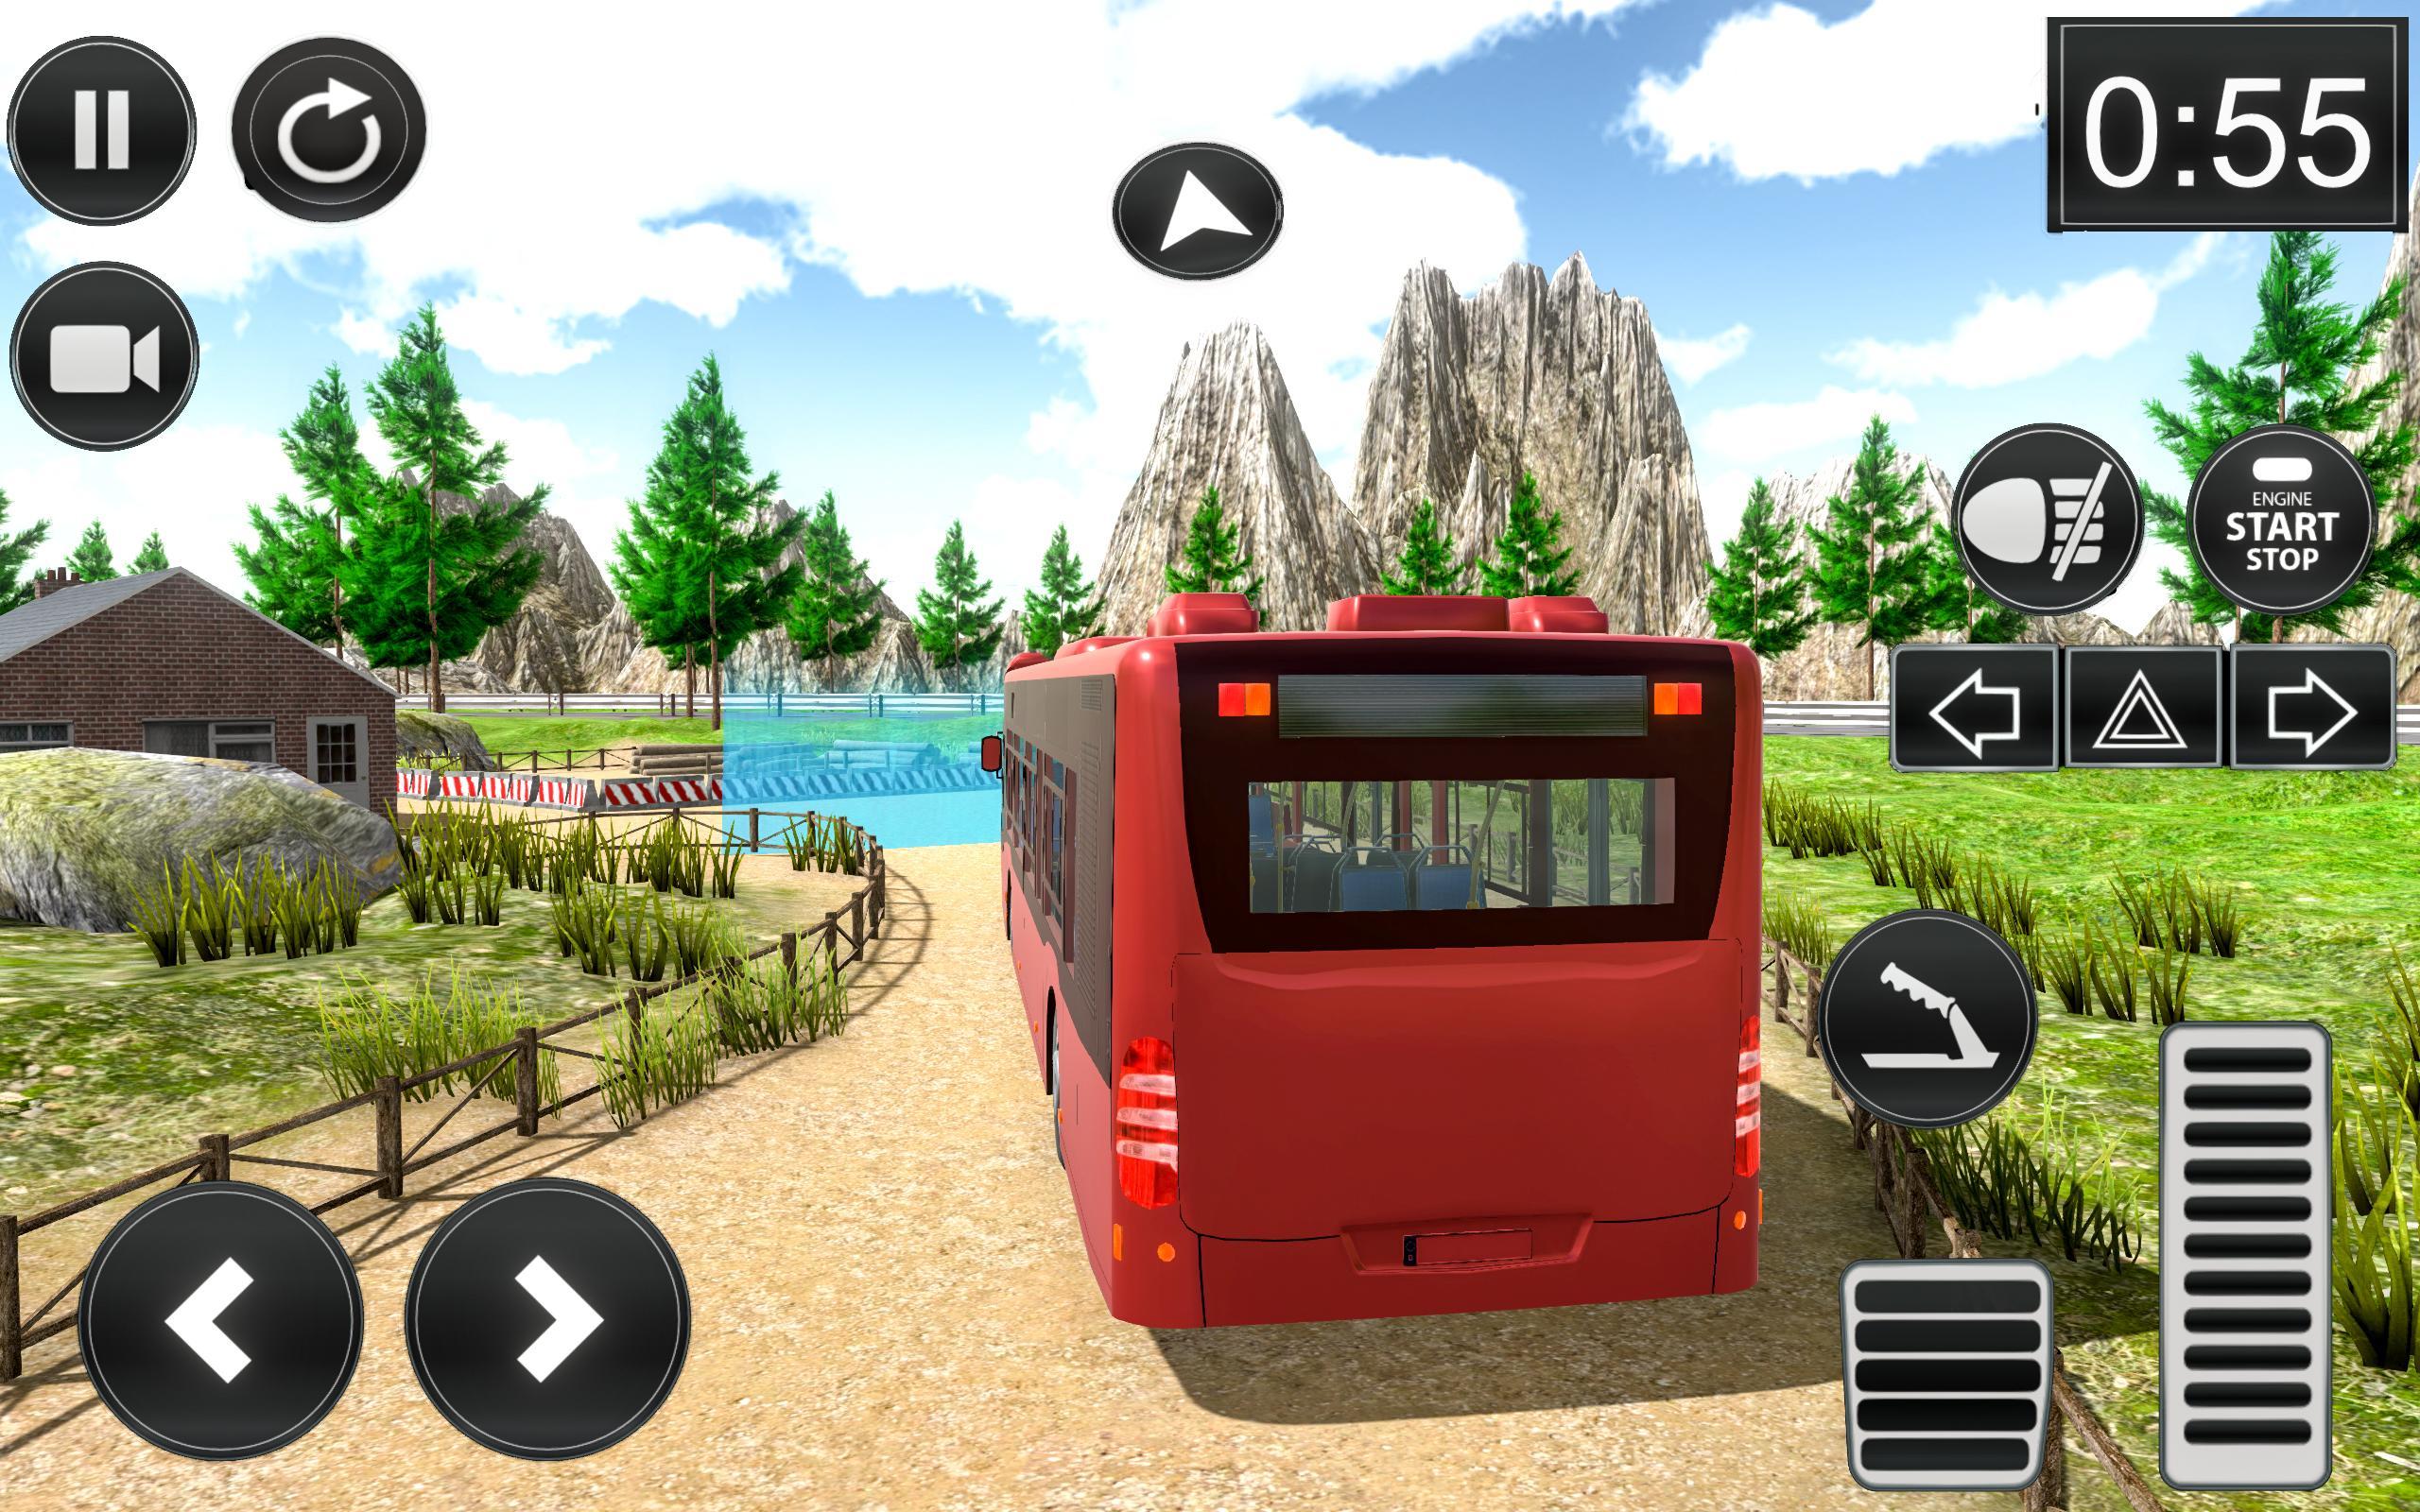 Countryside android. Bus Driver Simulator: countryside. Bus Driver Simulator countryside Xbox. Bus Driver Simulator countryside купить. Bus Driver Simulator countryside купить аккаунт.